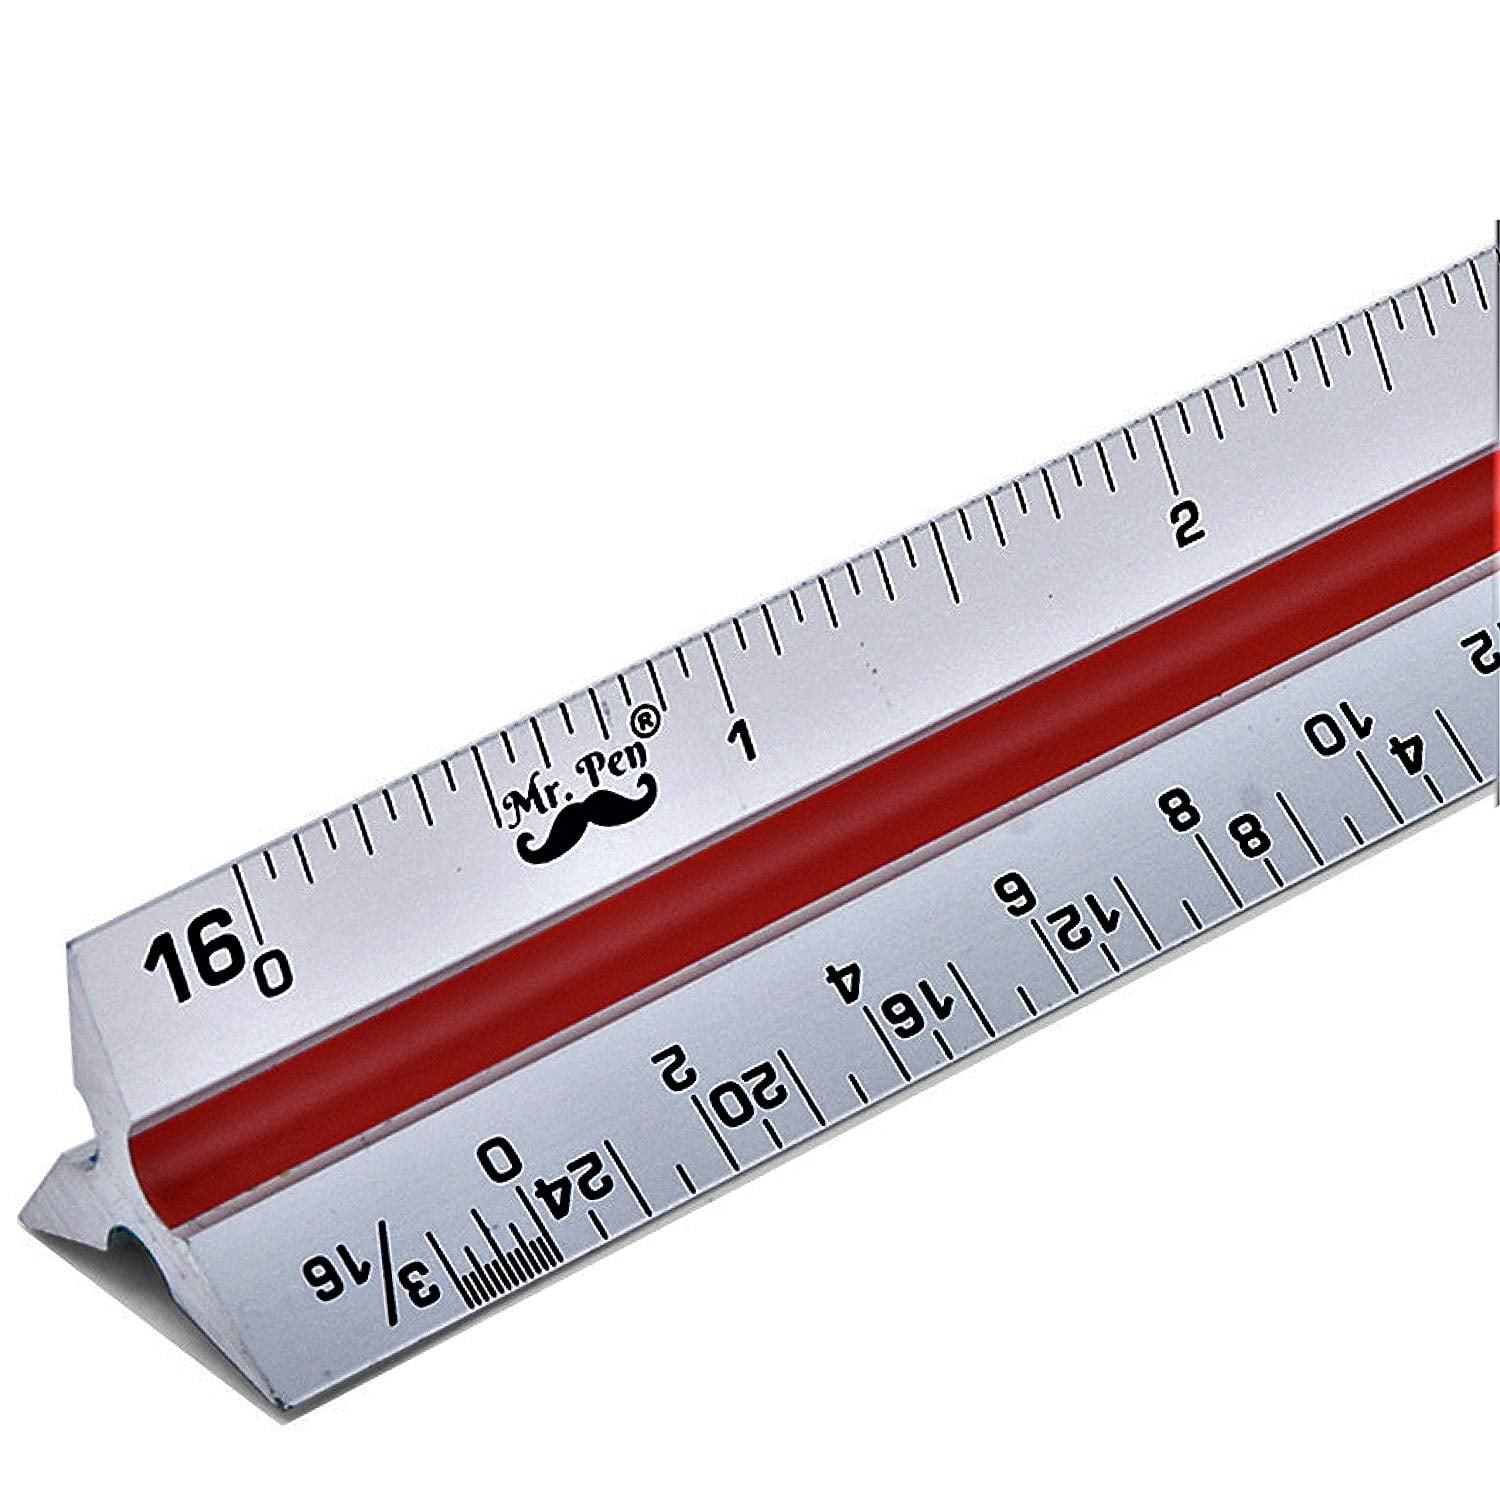 Reliable Triangular Architect Scale Ruler (12 Inch) in Bangalore at best  price by H P BALA STATIONERY - Justdial